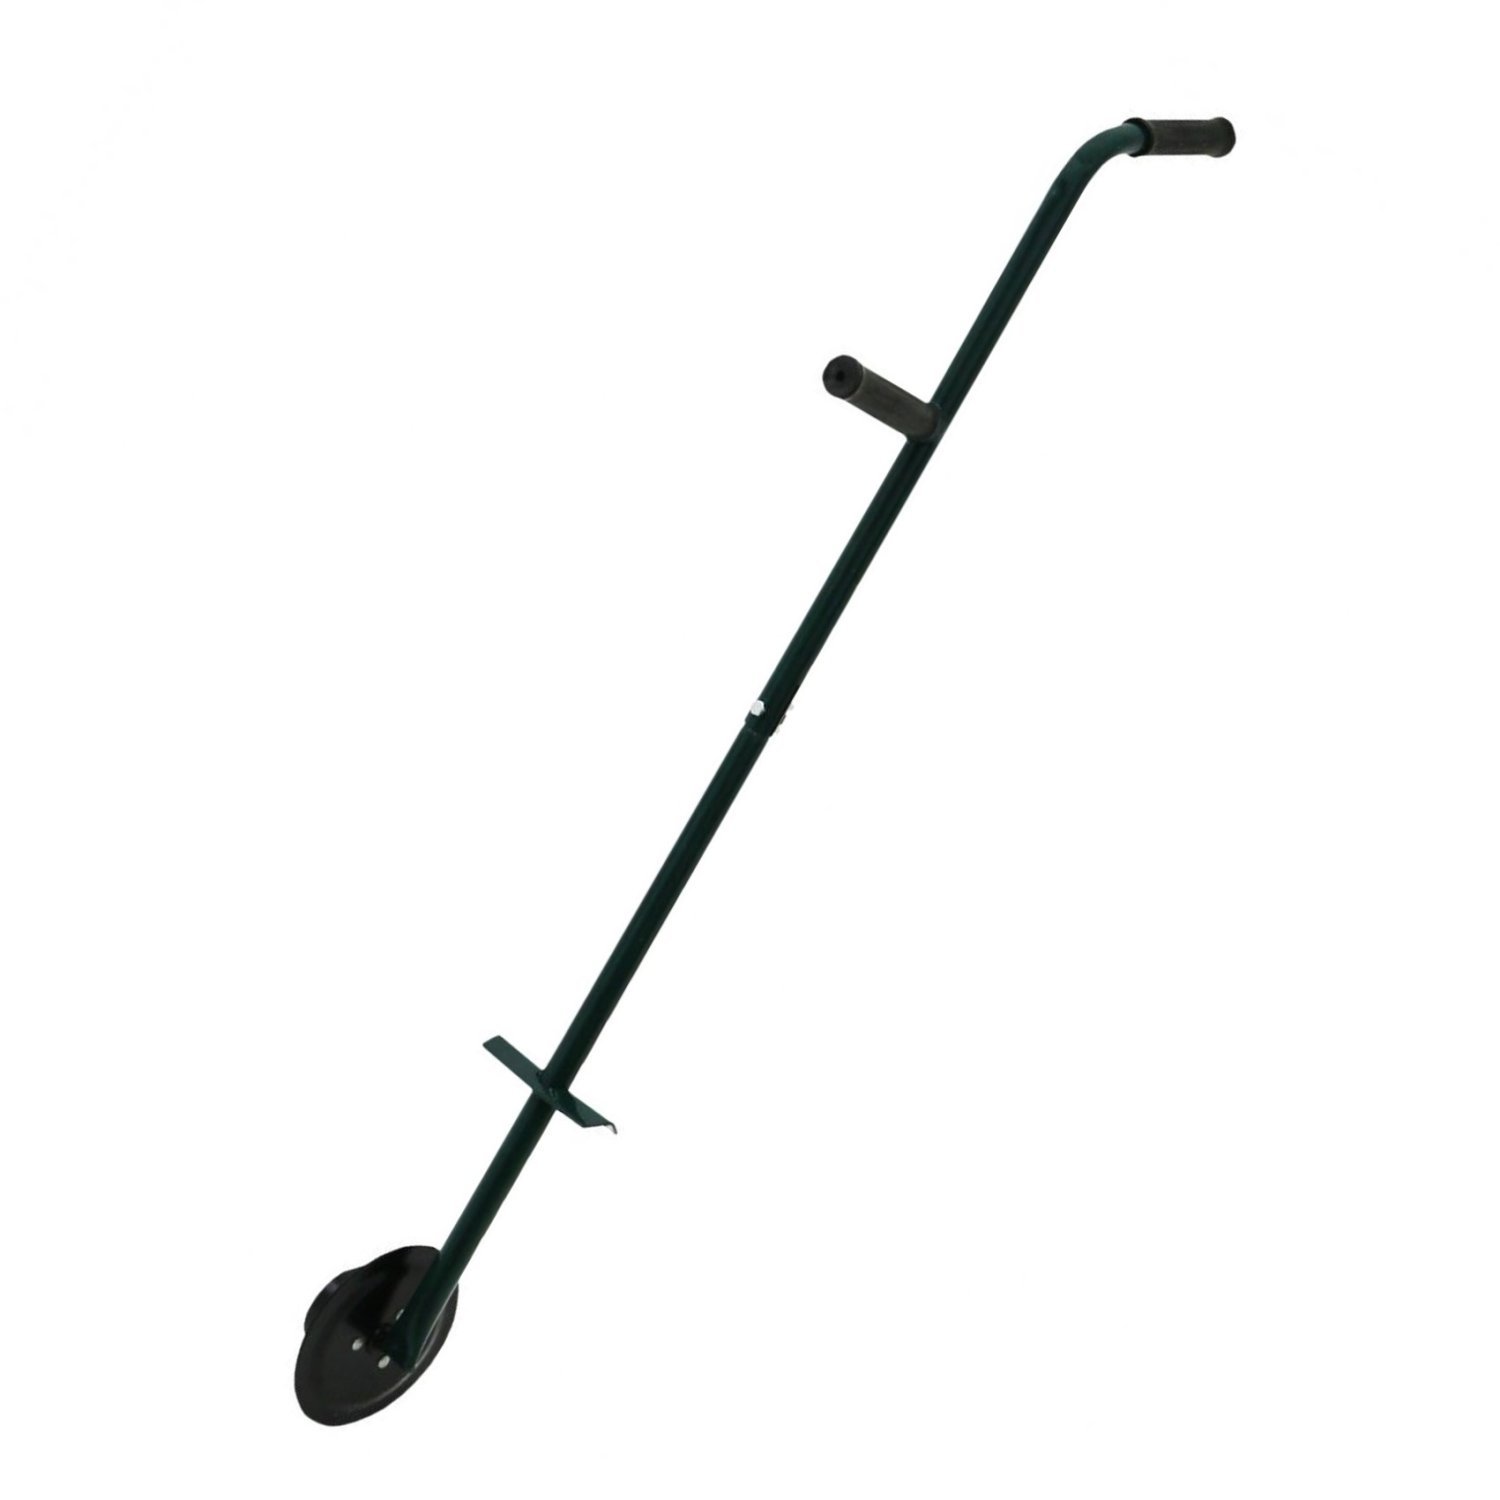 Rolling Garden Lawn Border Edger Grass Cutter Trimmer - Click Image to Close